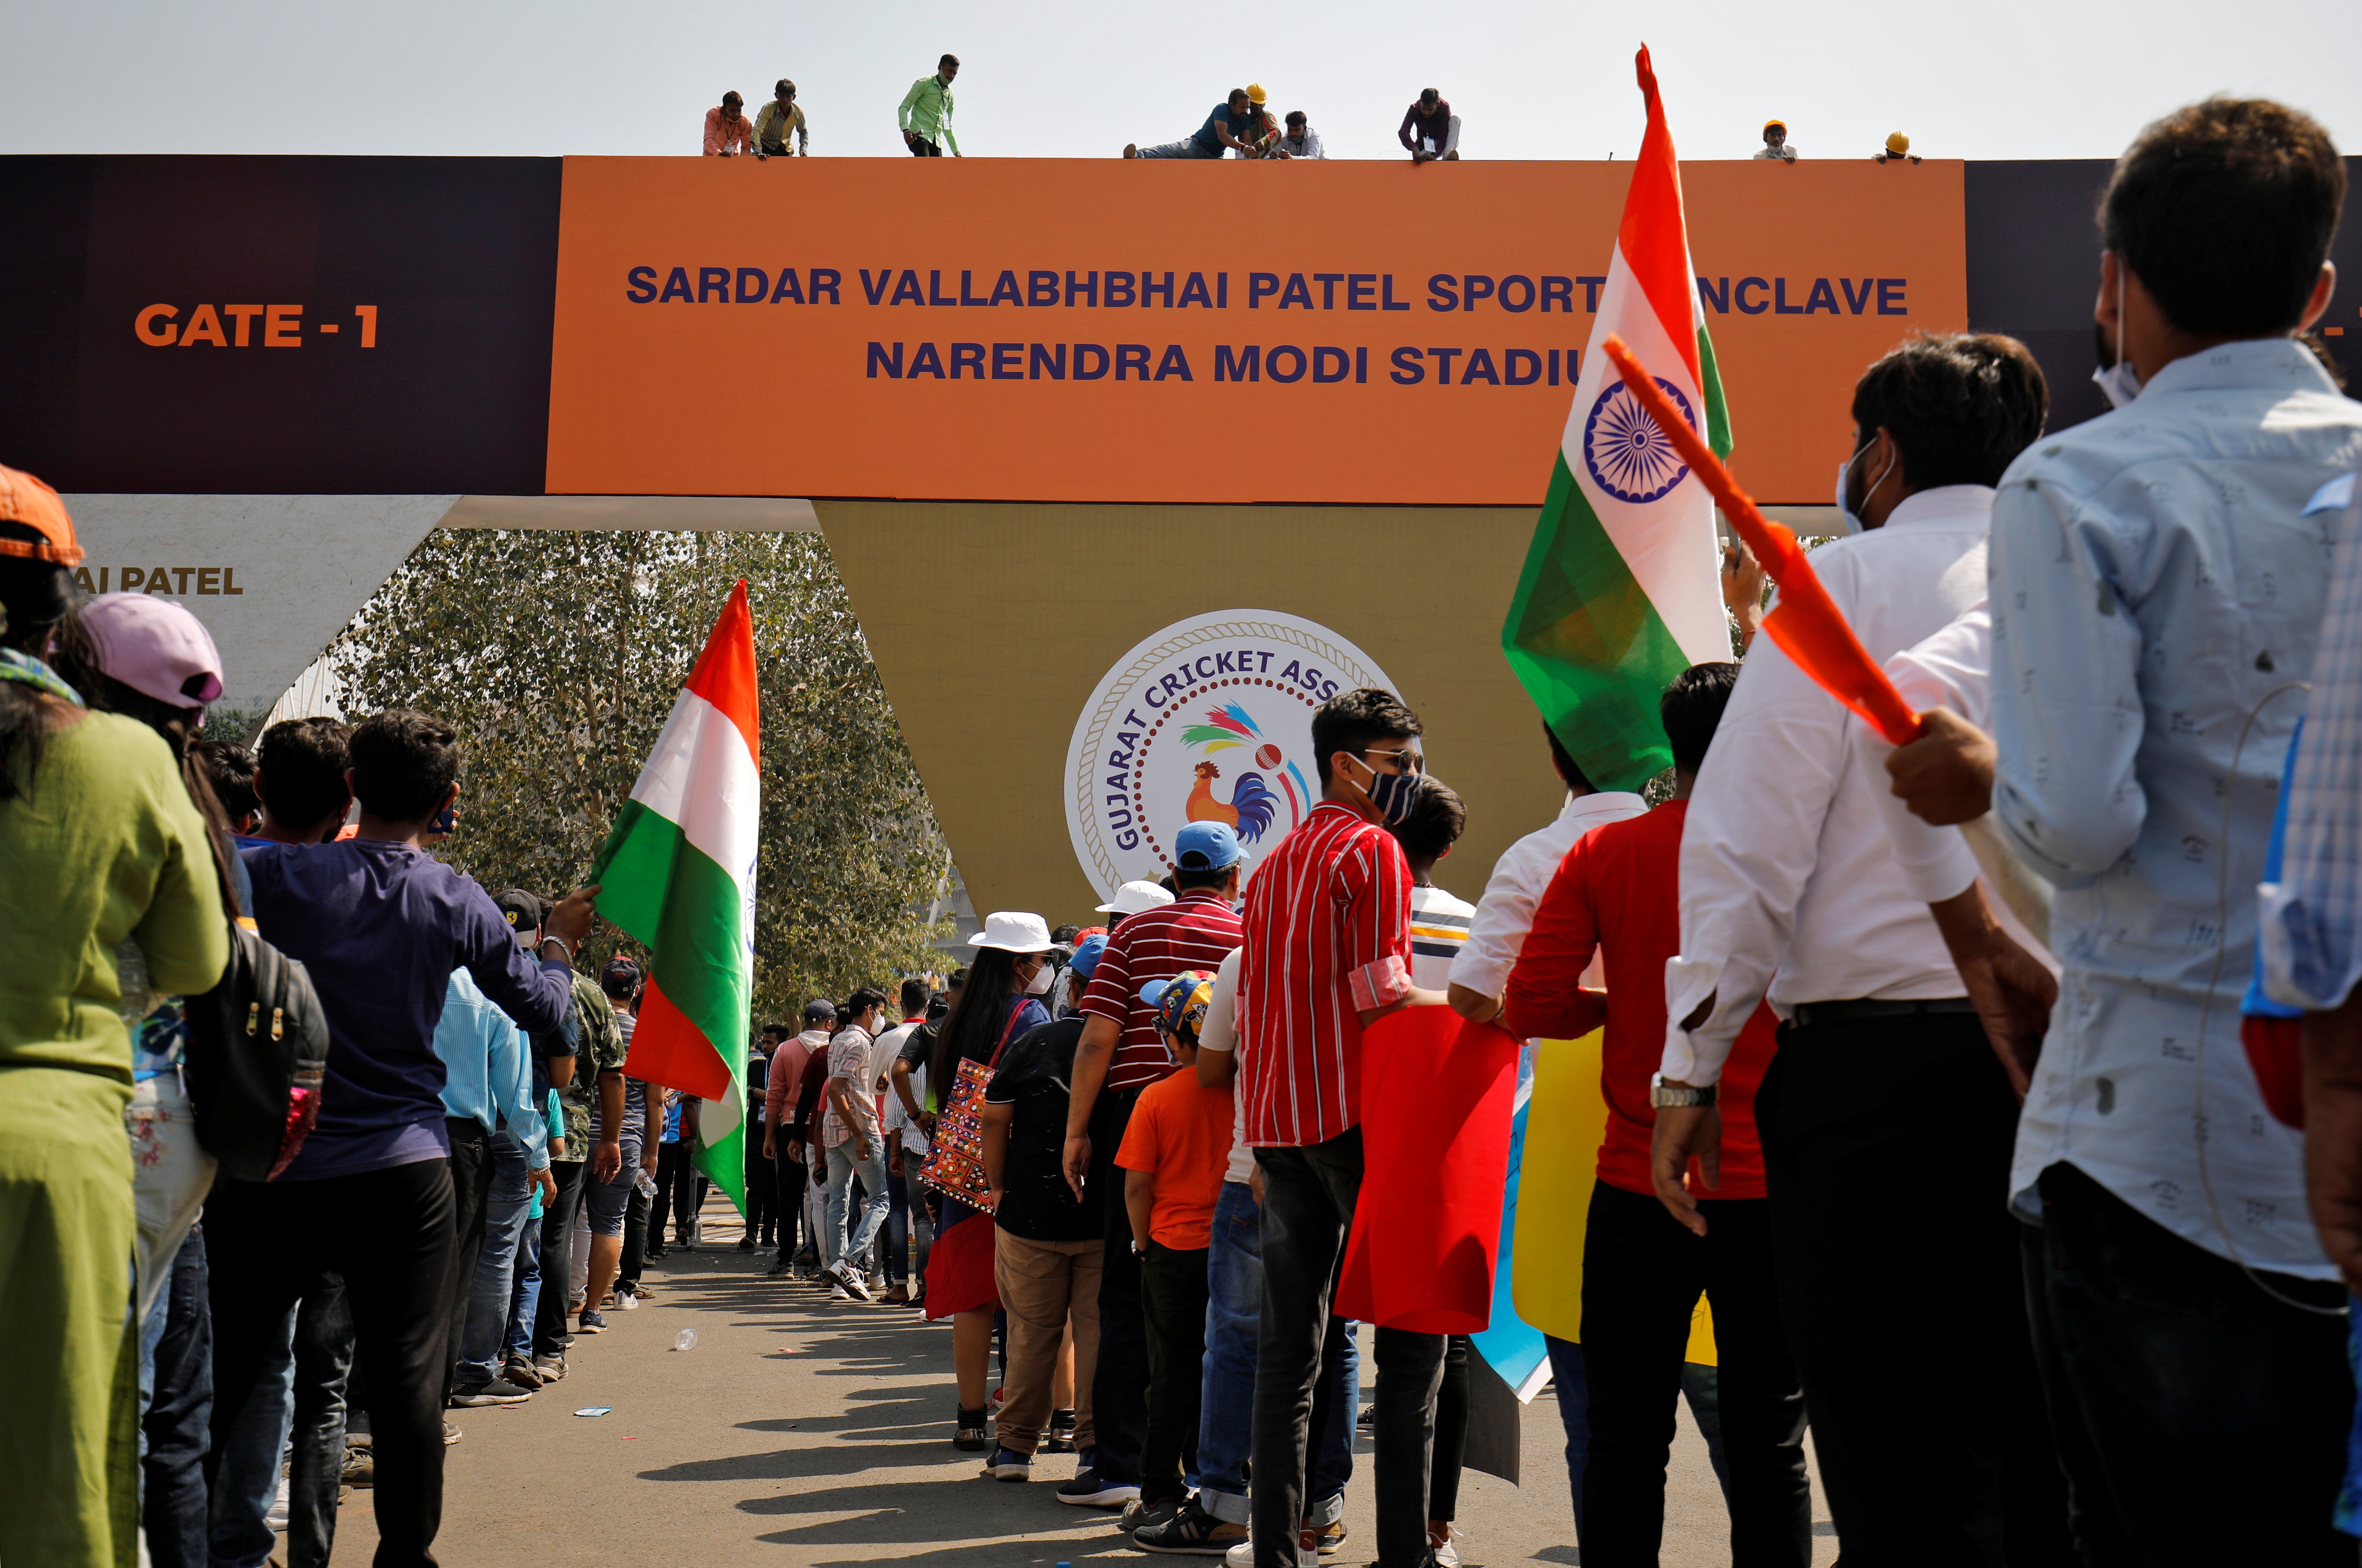 Workers install a hoarding renaming the world’s largest cricket stadium after Narendra Modi, even as fans wait to enter before the start of the third Test match between India and England